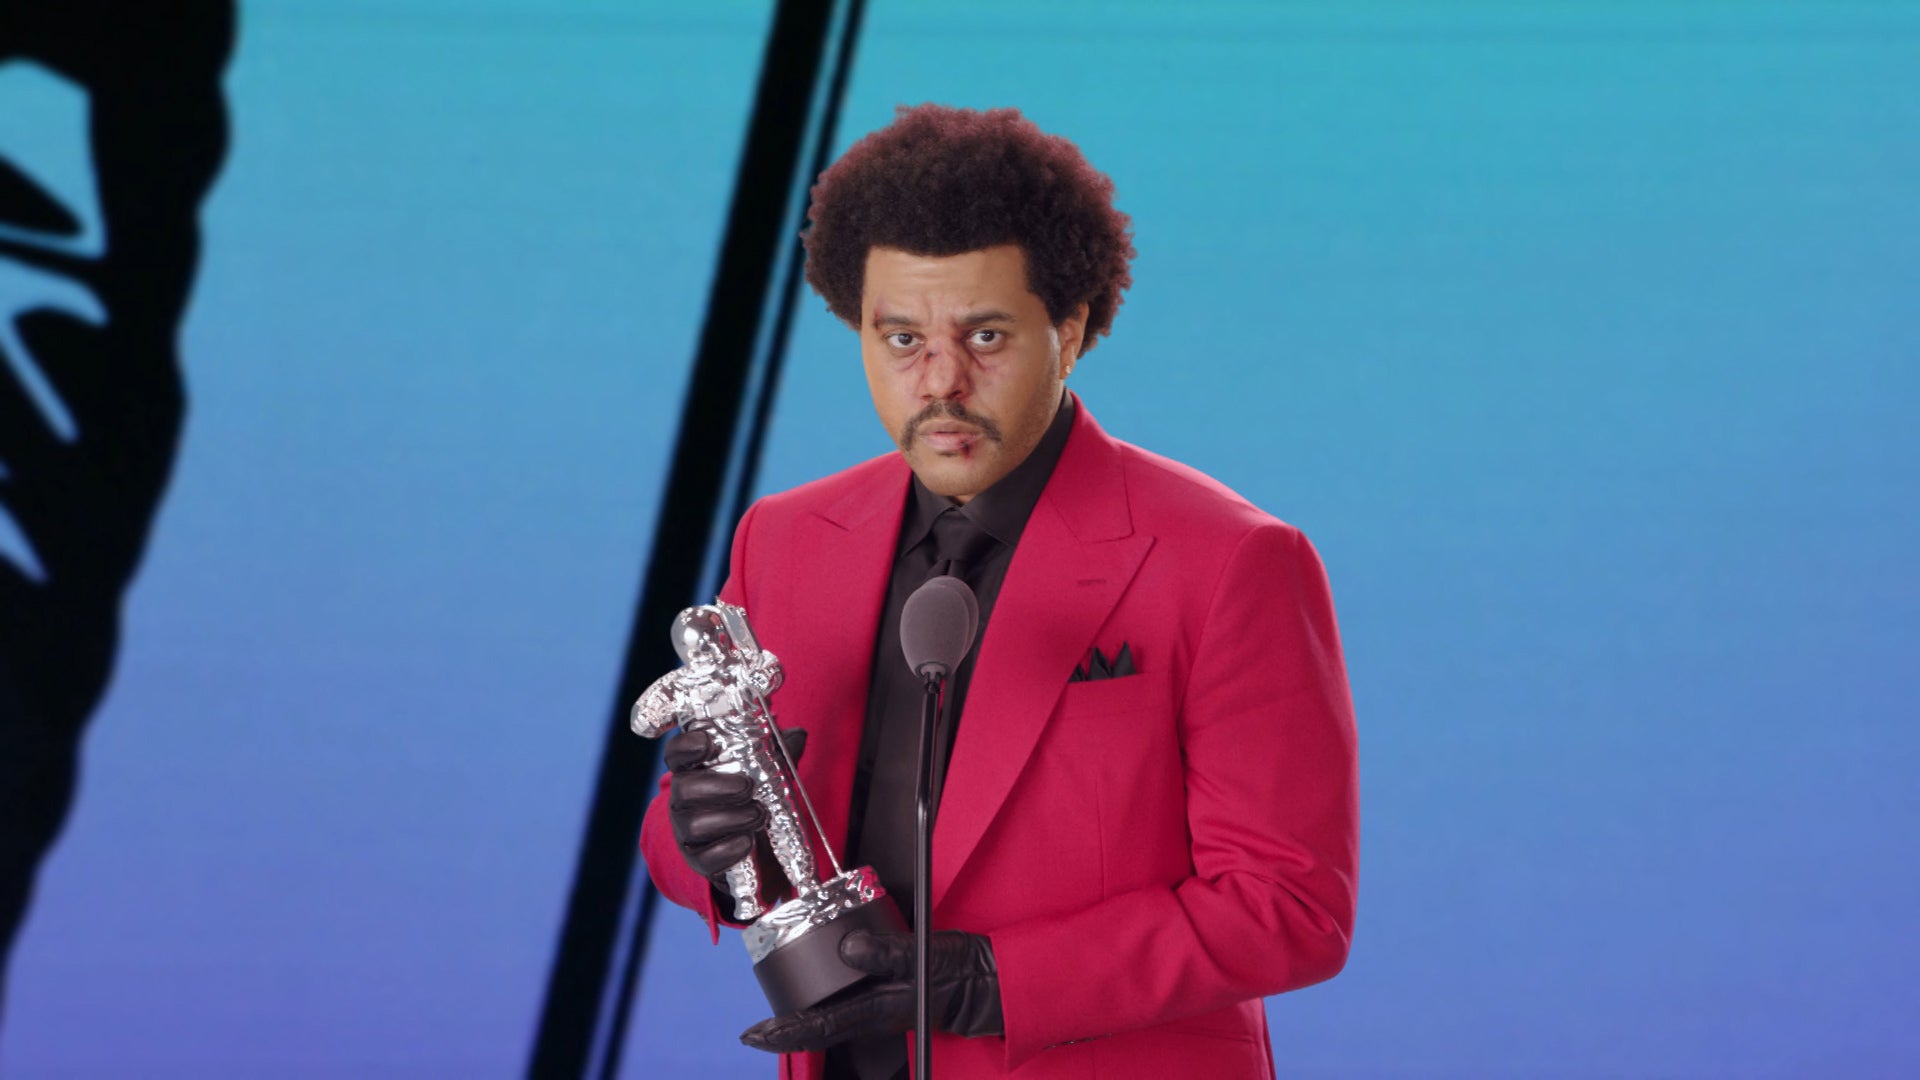 The Weeknd calls Grammy Awards 'corrupt' after nominations snub